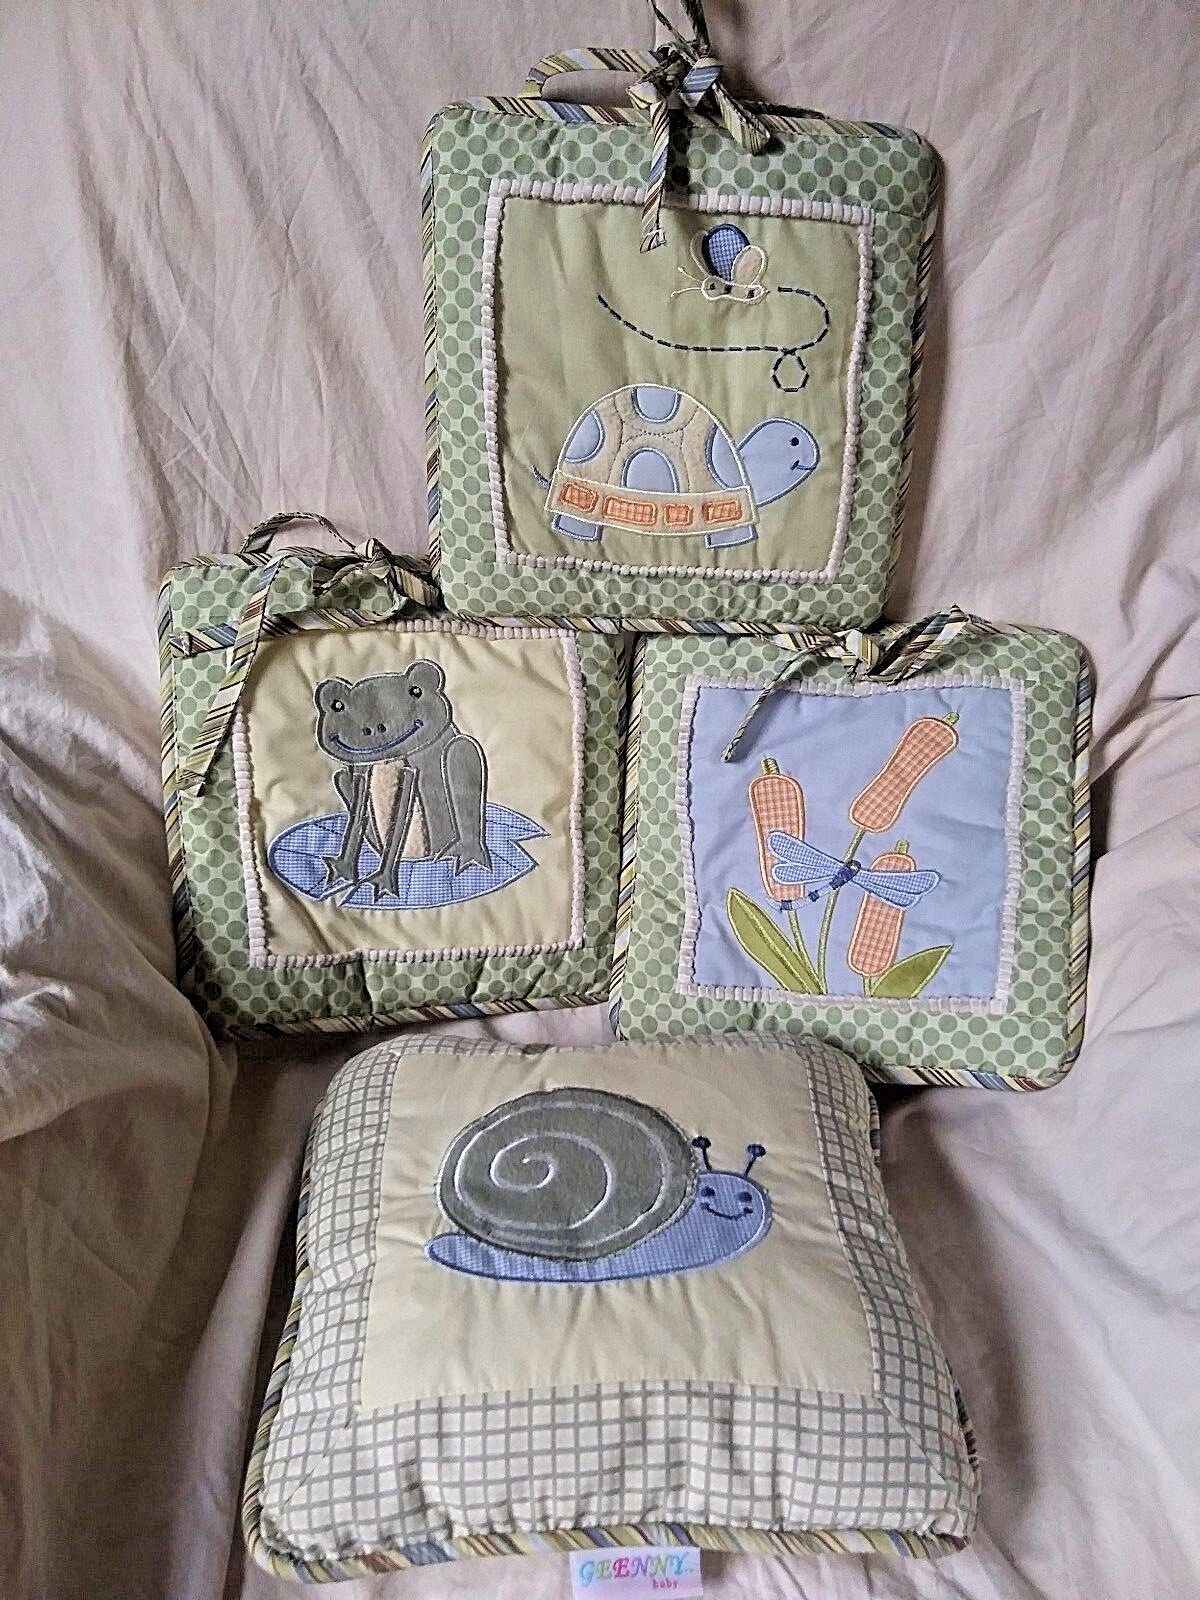 Geenny Baby Nursery Wall Hangings Pillow Green Yellow Frog Turtle Snail Crib